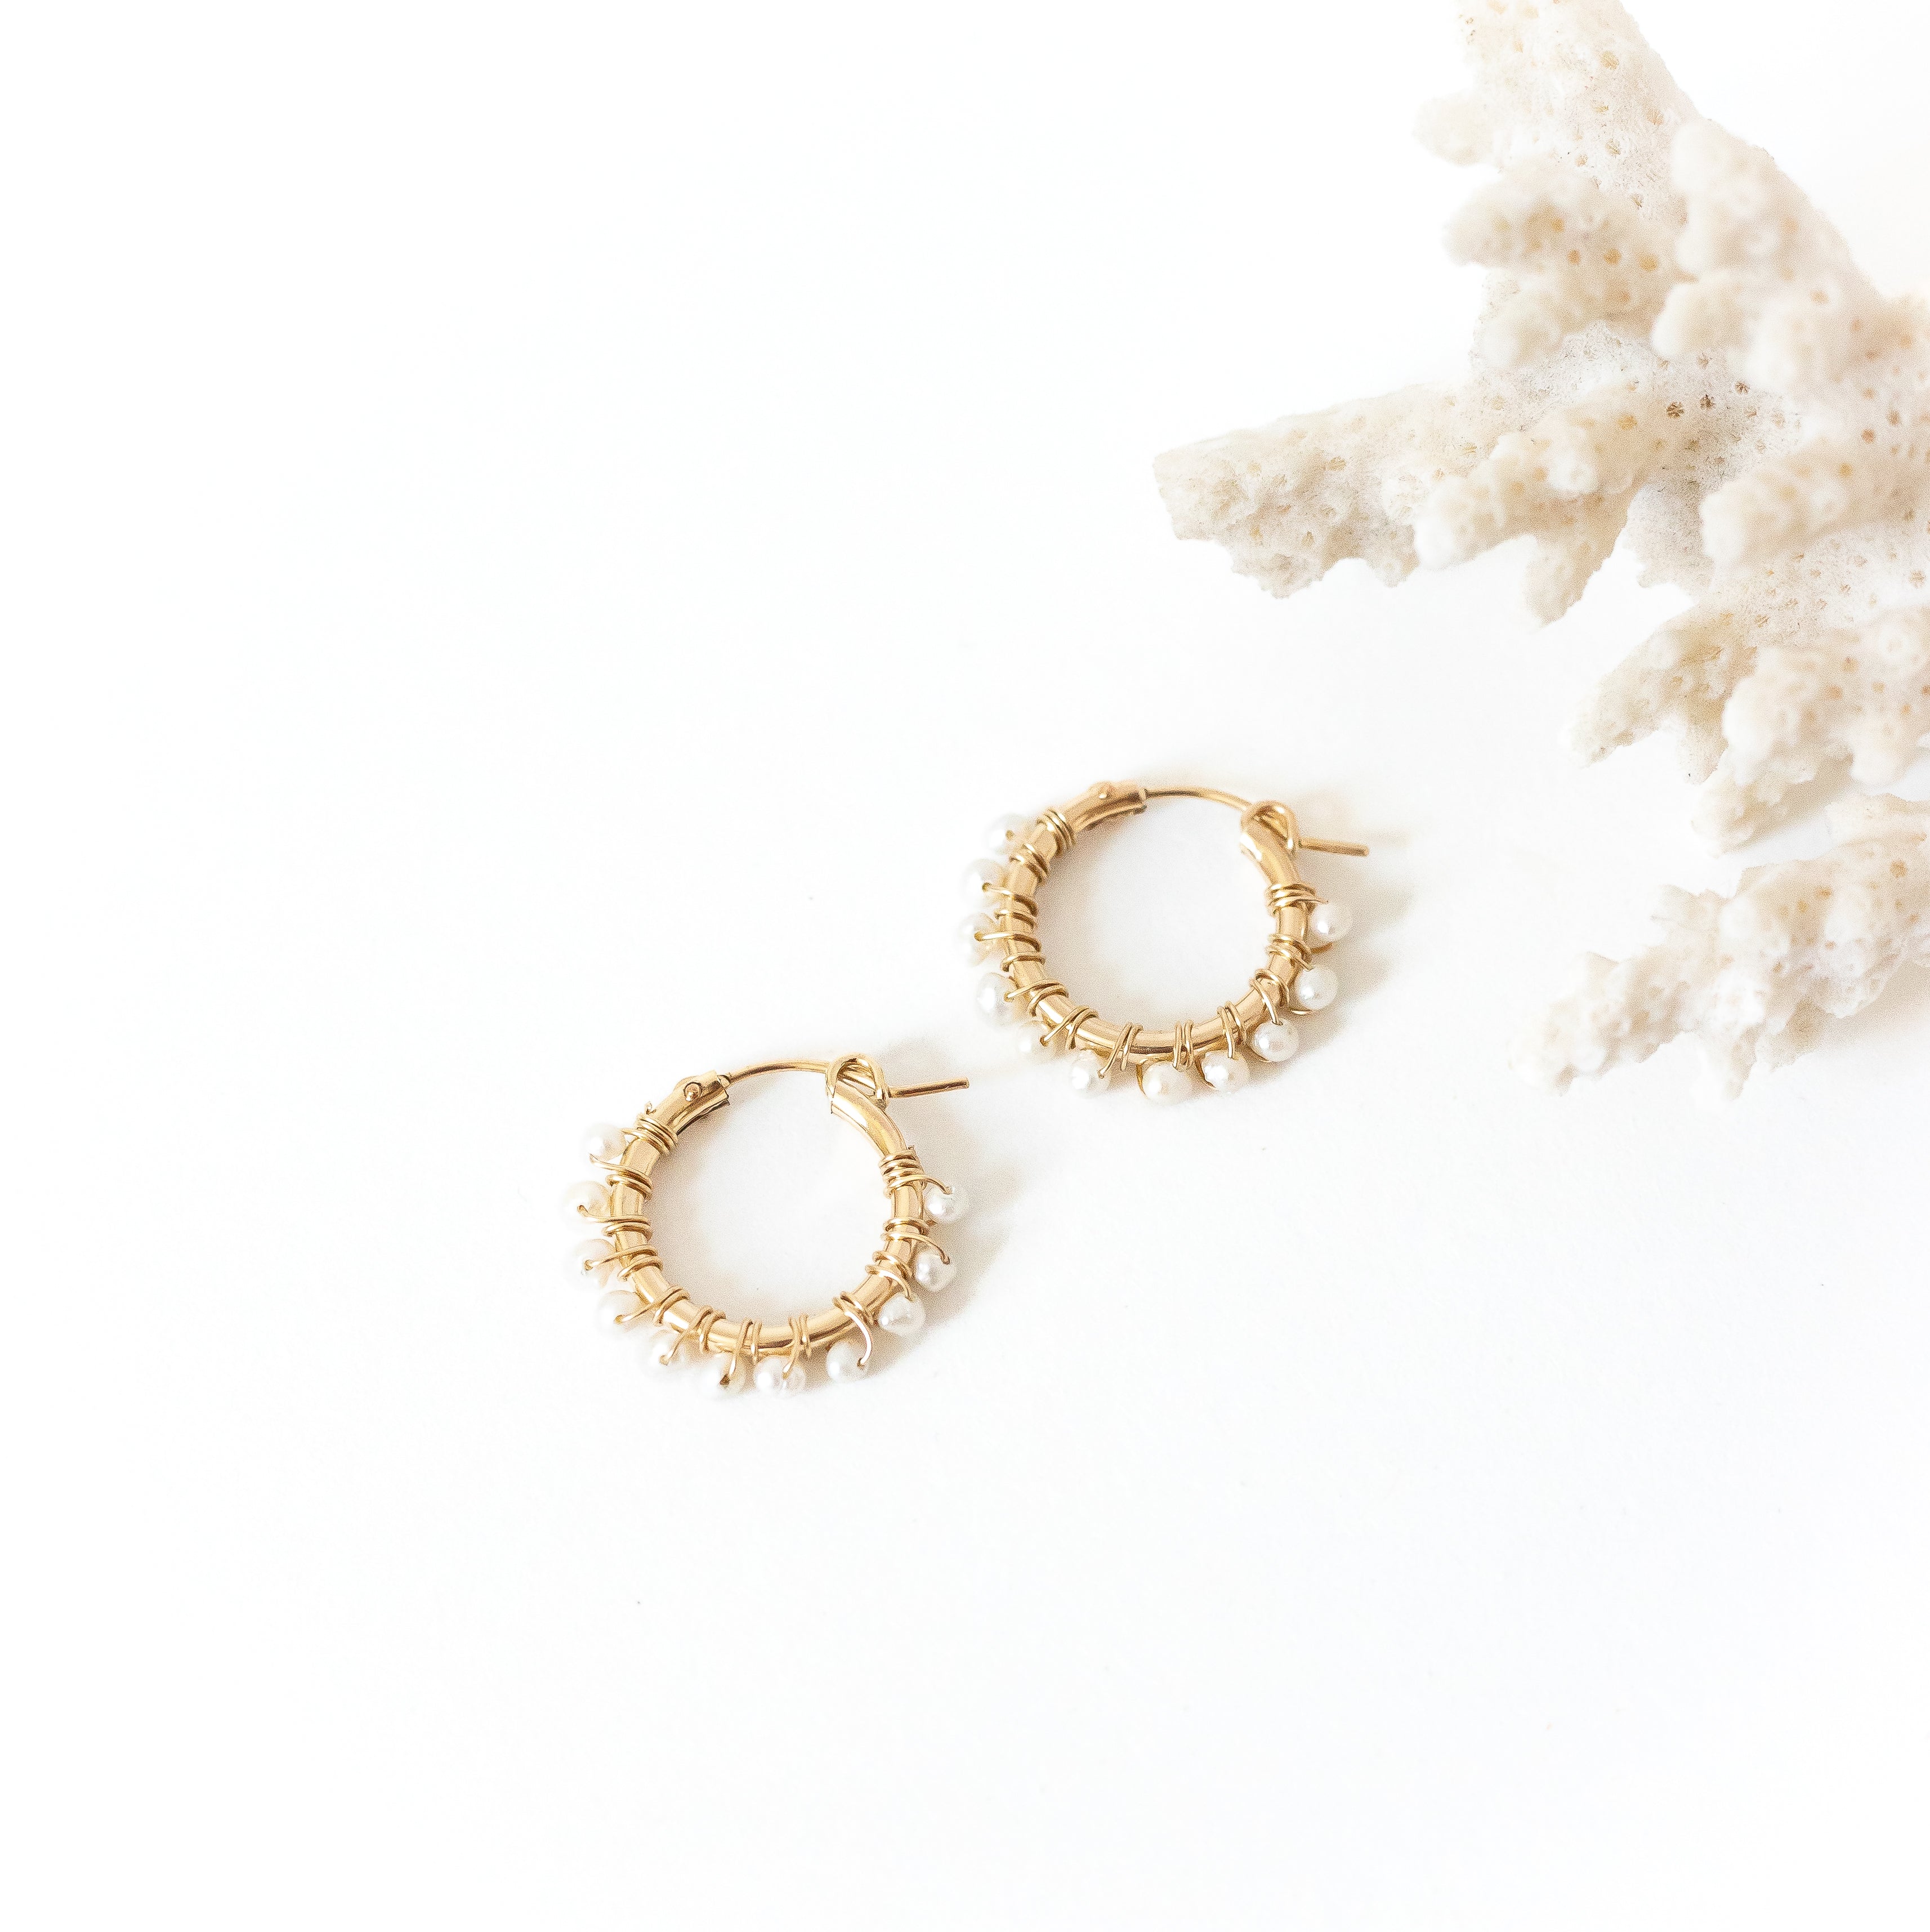 Gold hoops with pearls wire wrapped around it. 